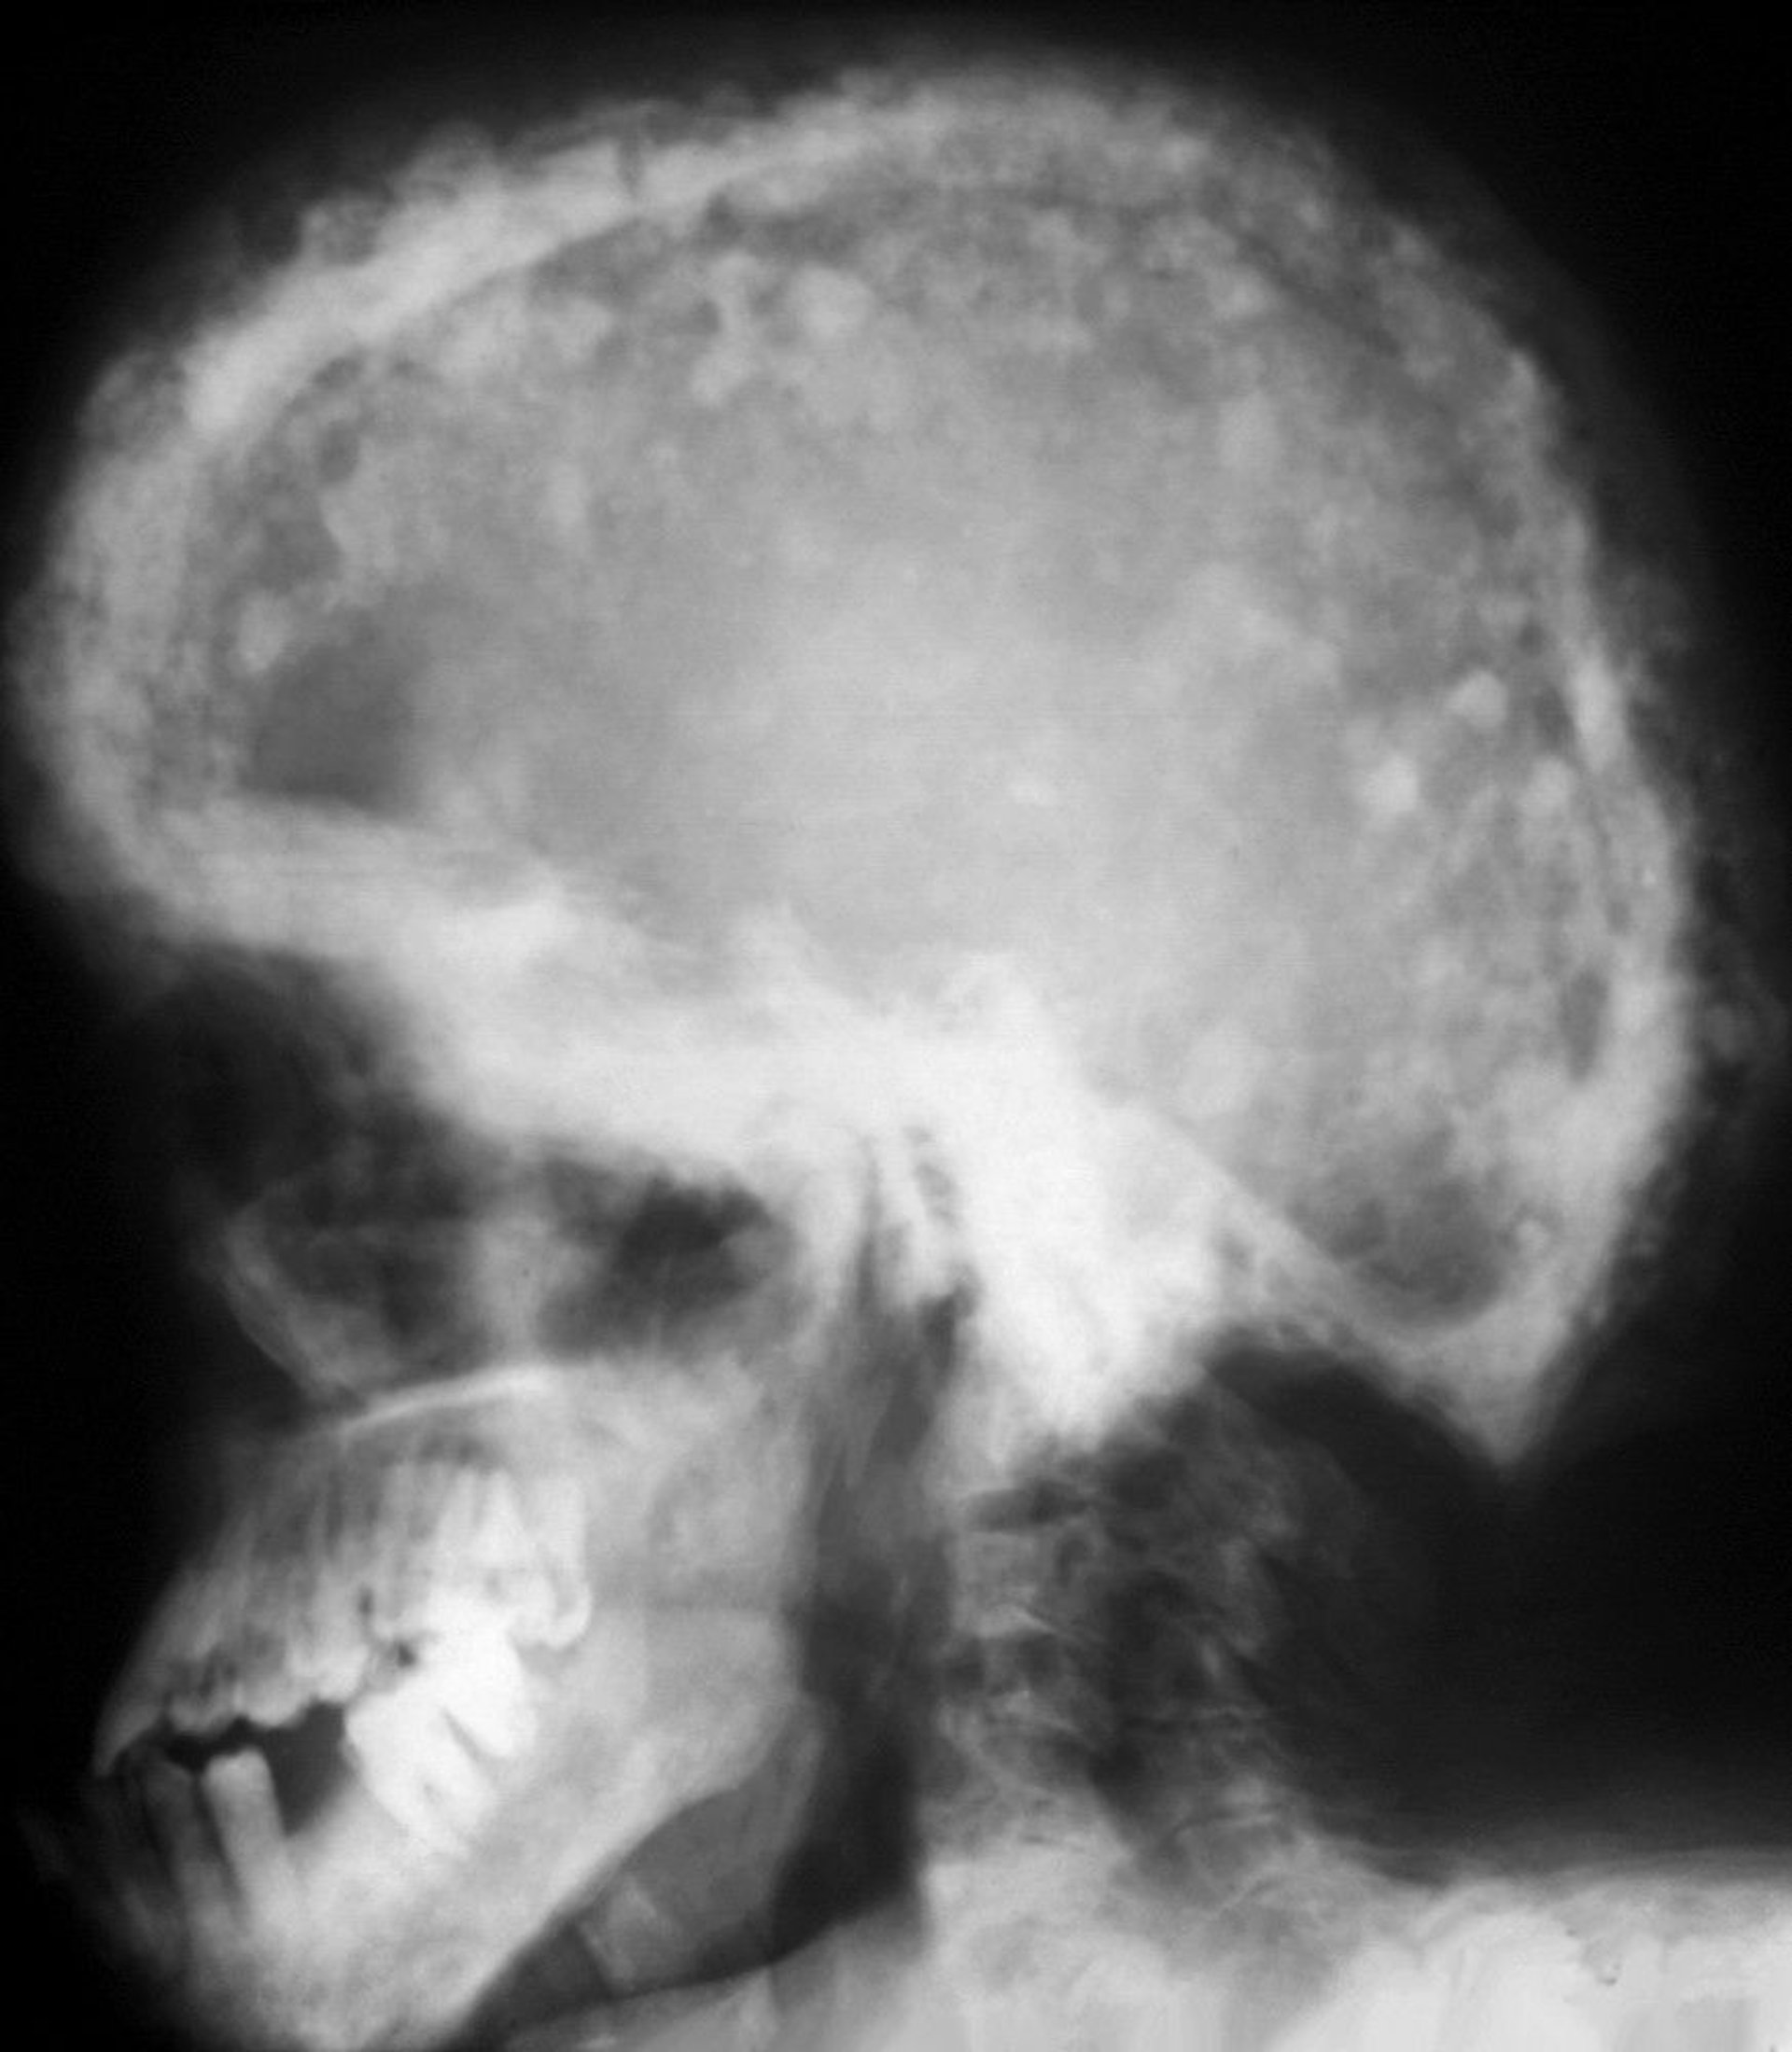 X-Ray of the Skull in Paget Disease